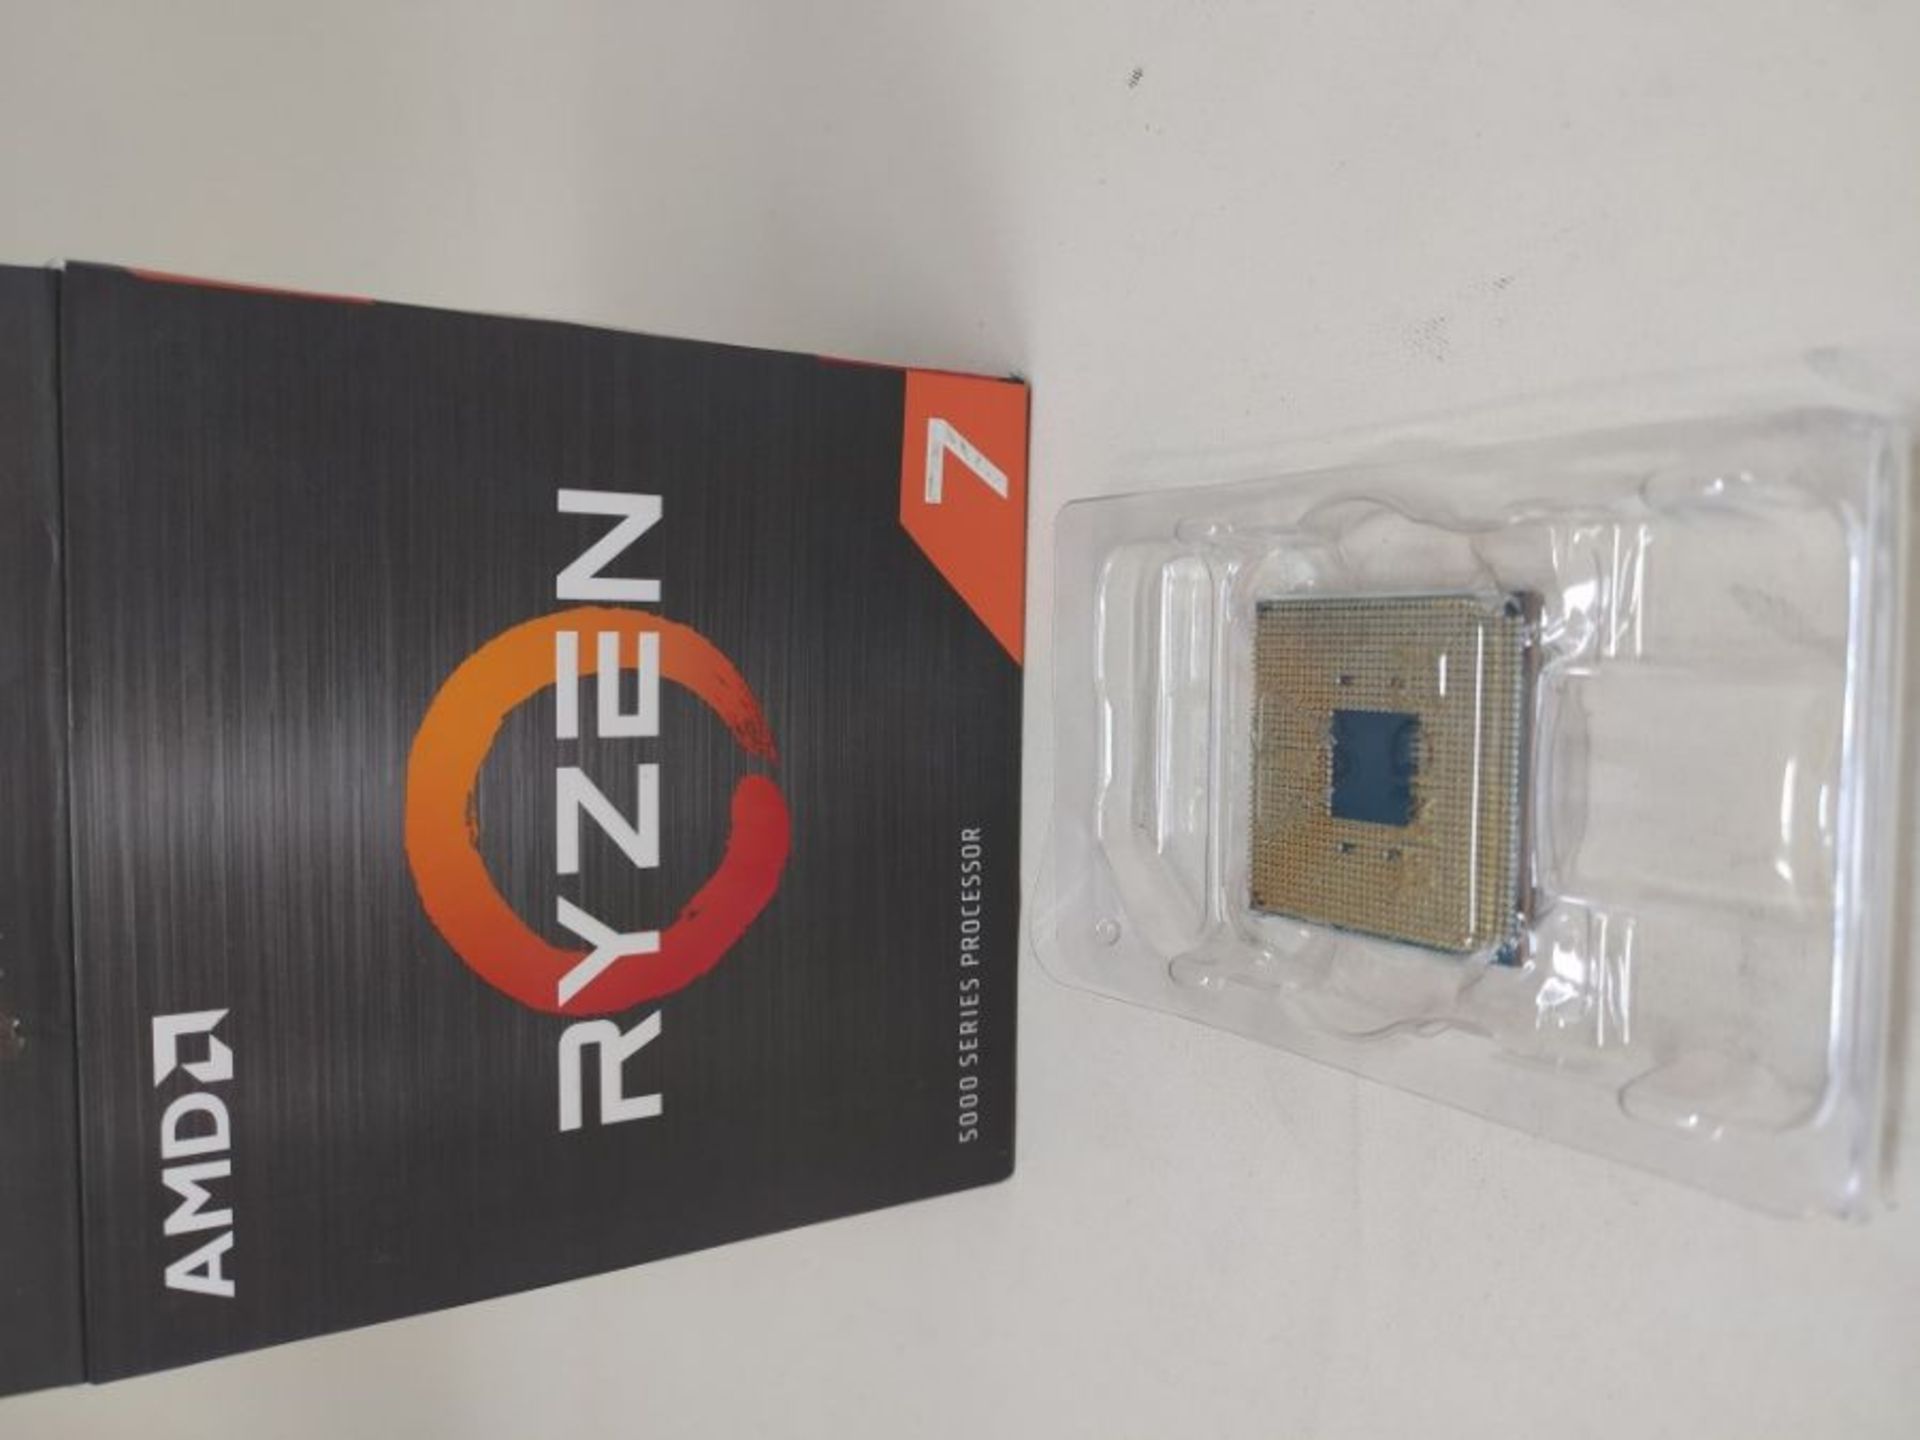 RRP £375.00 AMD Ryzen 7 5800X Processor (8C/16T, 36MB Cache, Up to 4.7 GHz Max Boost) - Image 2 of 3